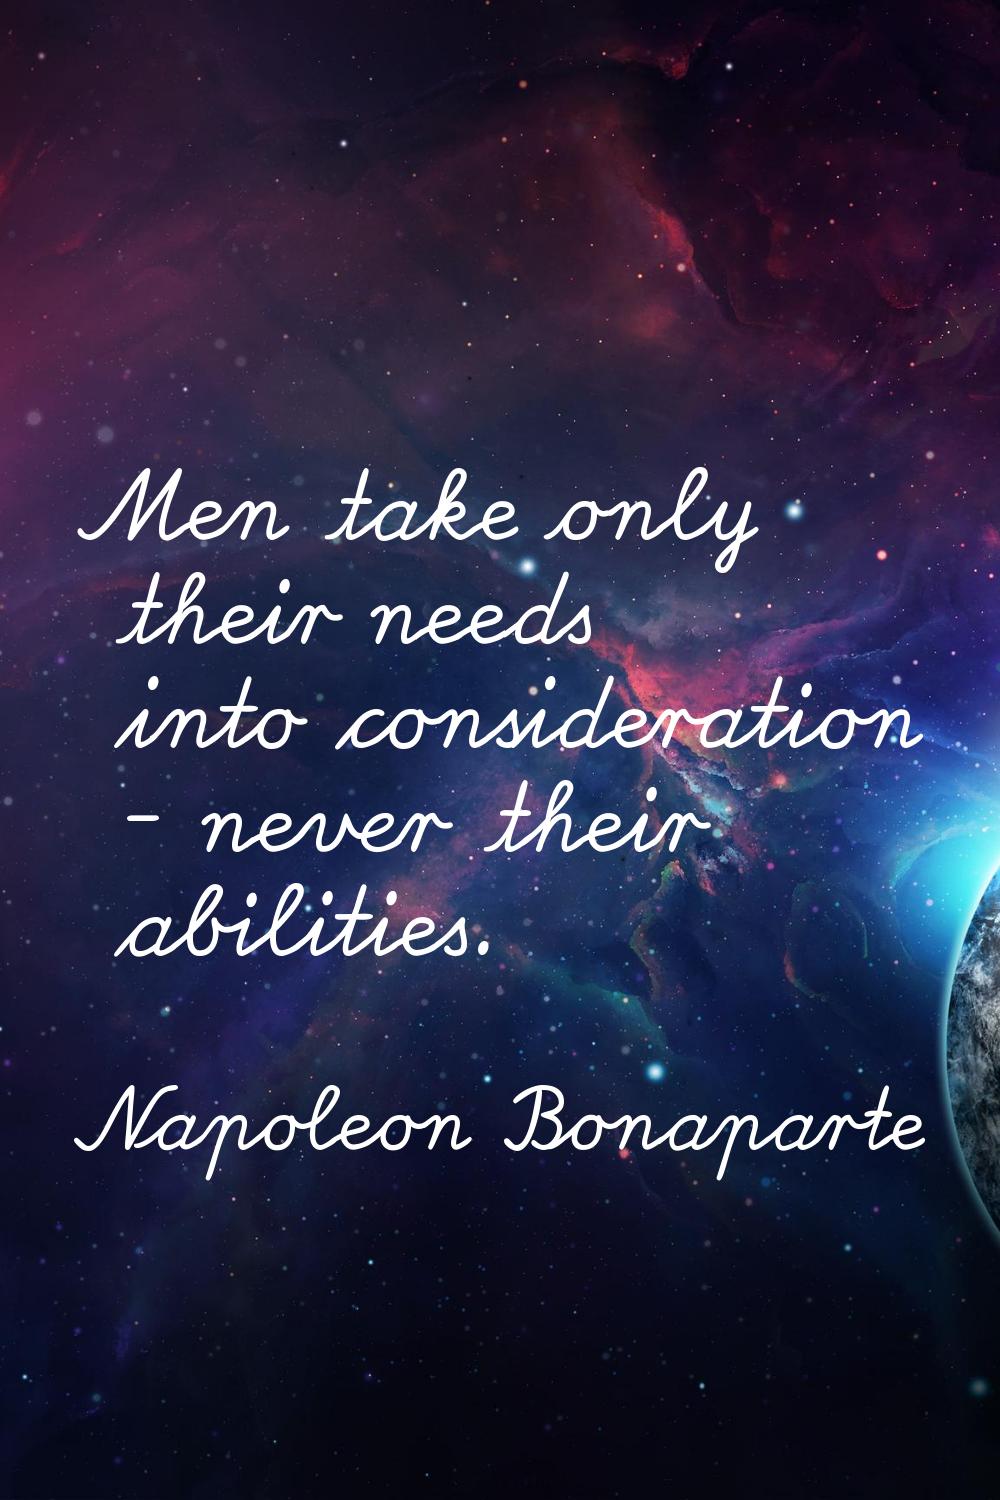 Men take only their needs into consideration - never their abilities.